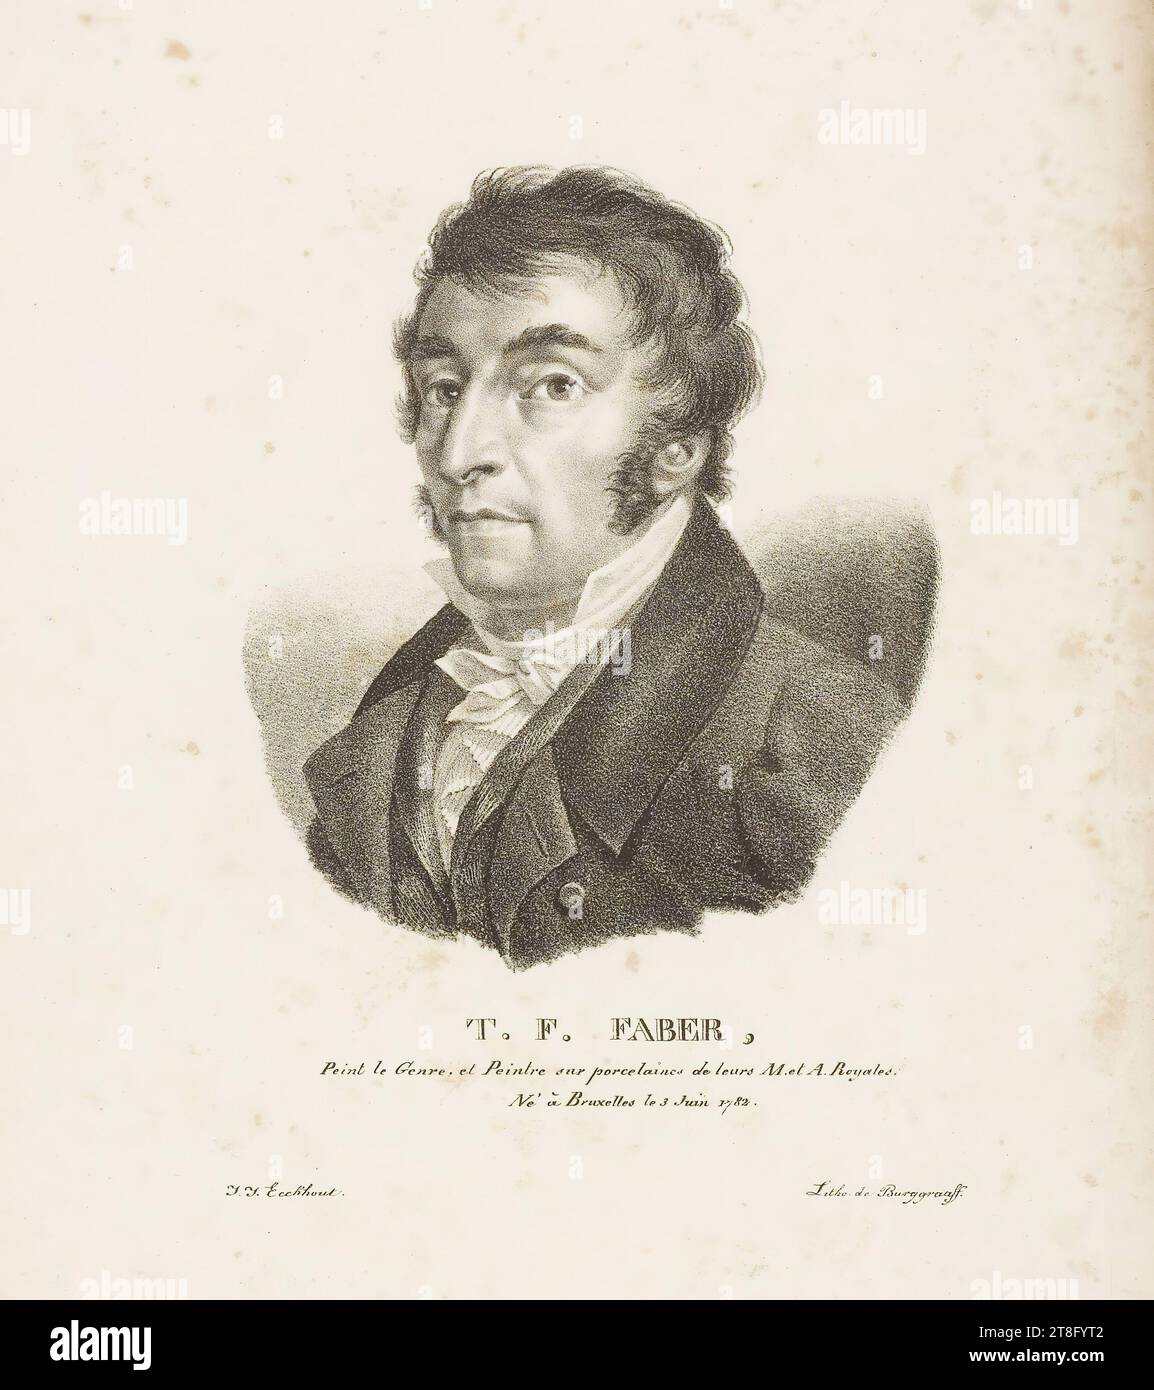 T. F. FABER, Paints the Genre, and Painter on porcelain of their M. and A. Royales., Born in Brussels on June 3, 1782. J. J. Eeckhout. Litho. from Burggraaf. illustration from: Collection of portraits of modern artists, born in the Kingdom of the Netherlands, drawn from nature by J. J. Eeckhout, and lithographed by G. P. Van den Burggraaff. Brussels 1822 Stock Photo